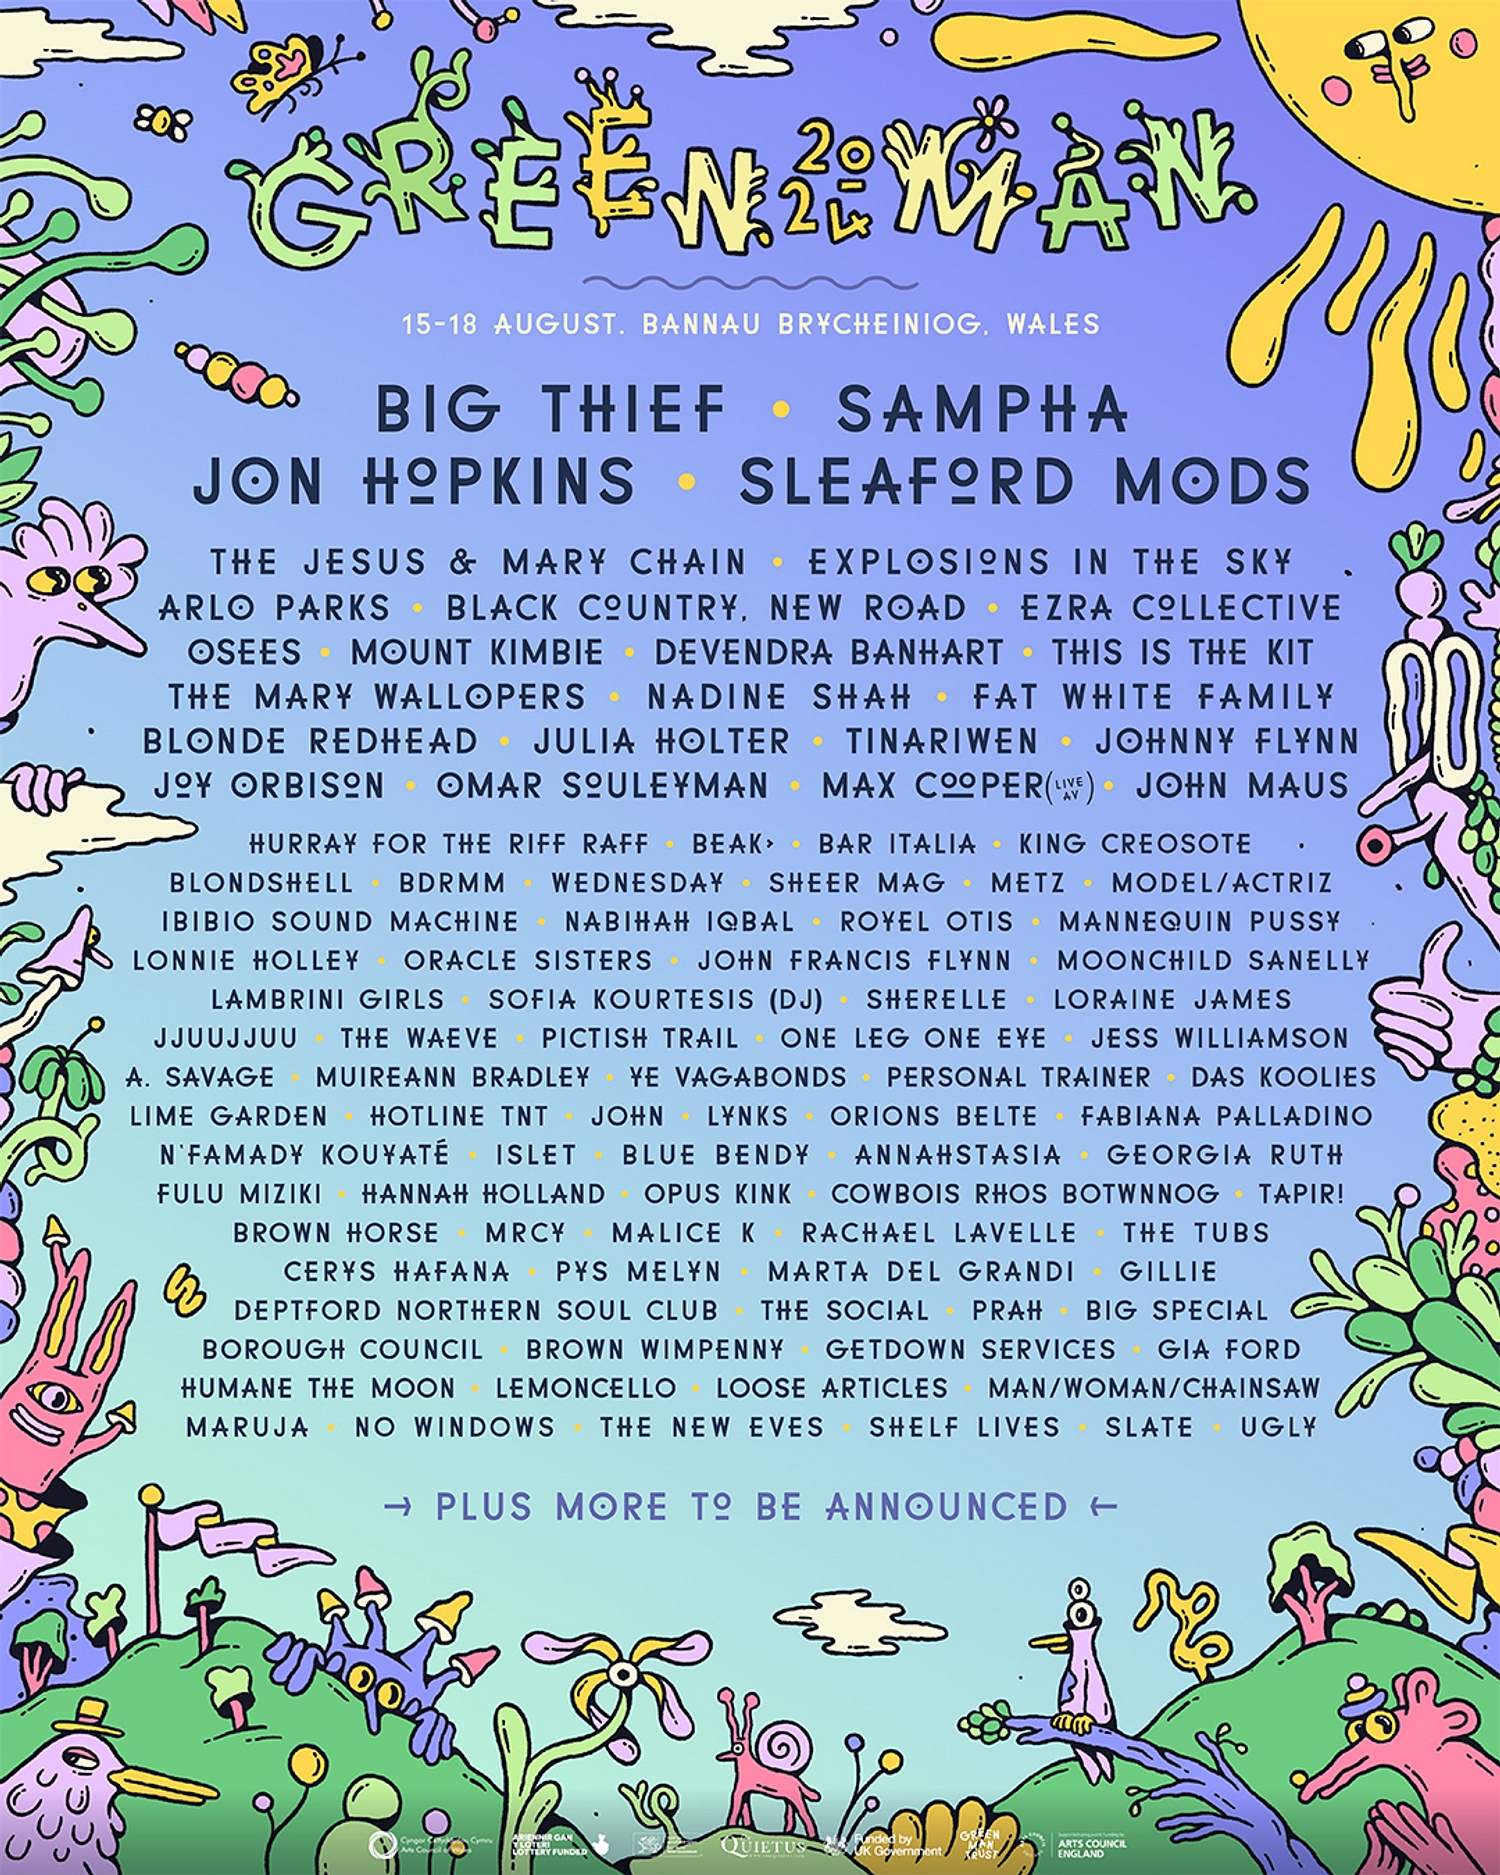 Green Man Festival announces Big Thief, Sampha, Sleaford Mods and more for 2024 lineup